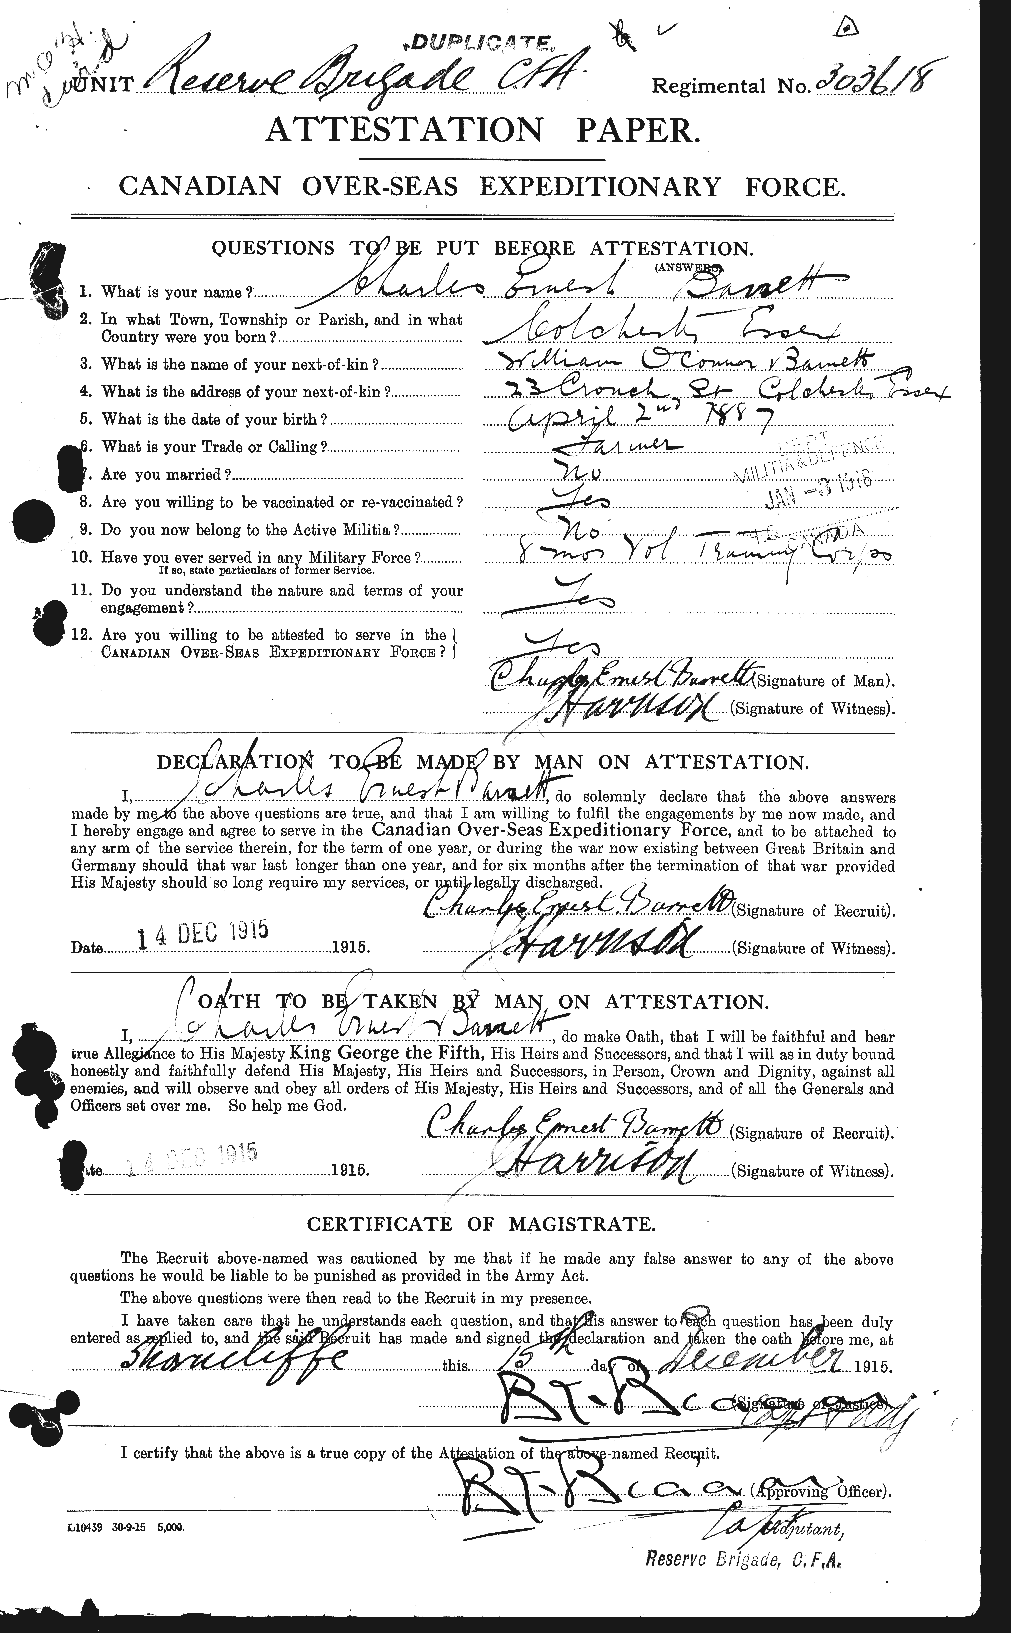 Personnel Records of the First World War - CEF 222228a